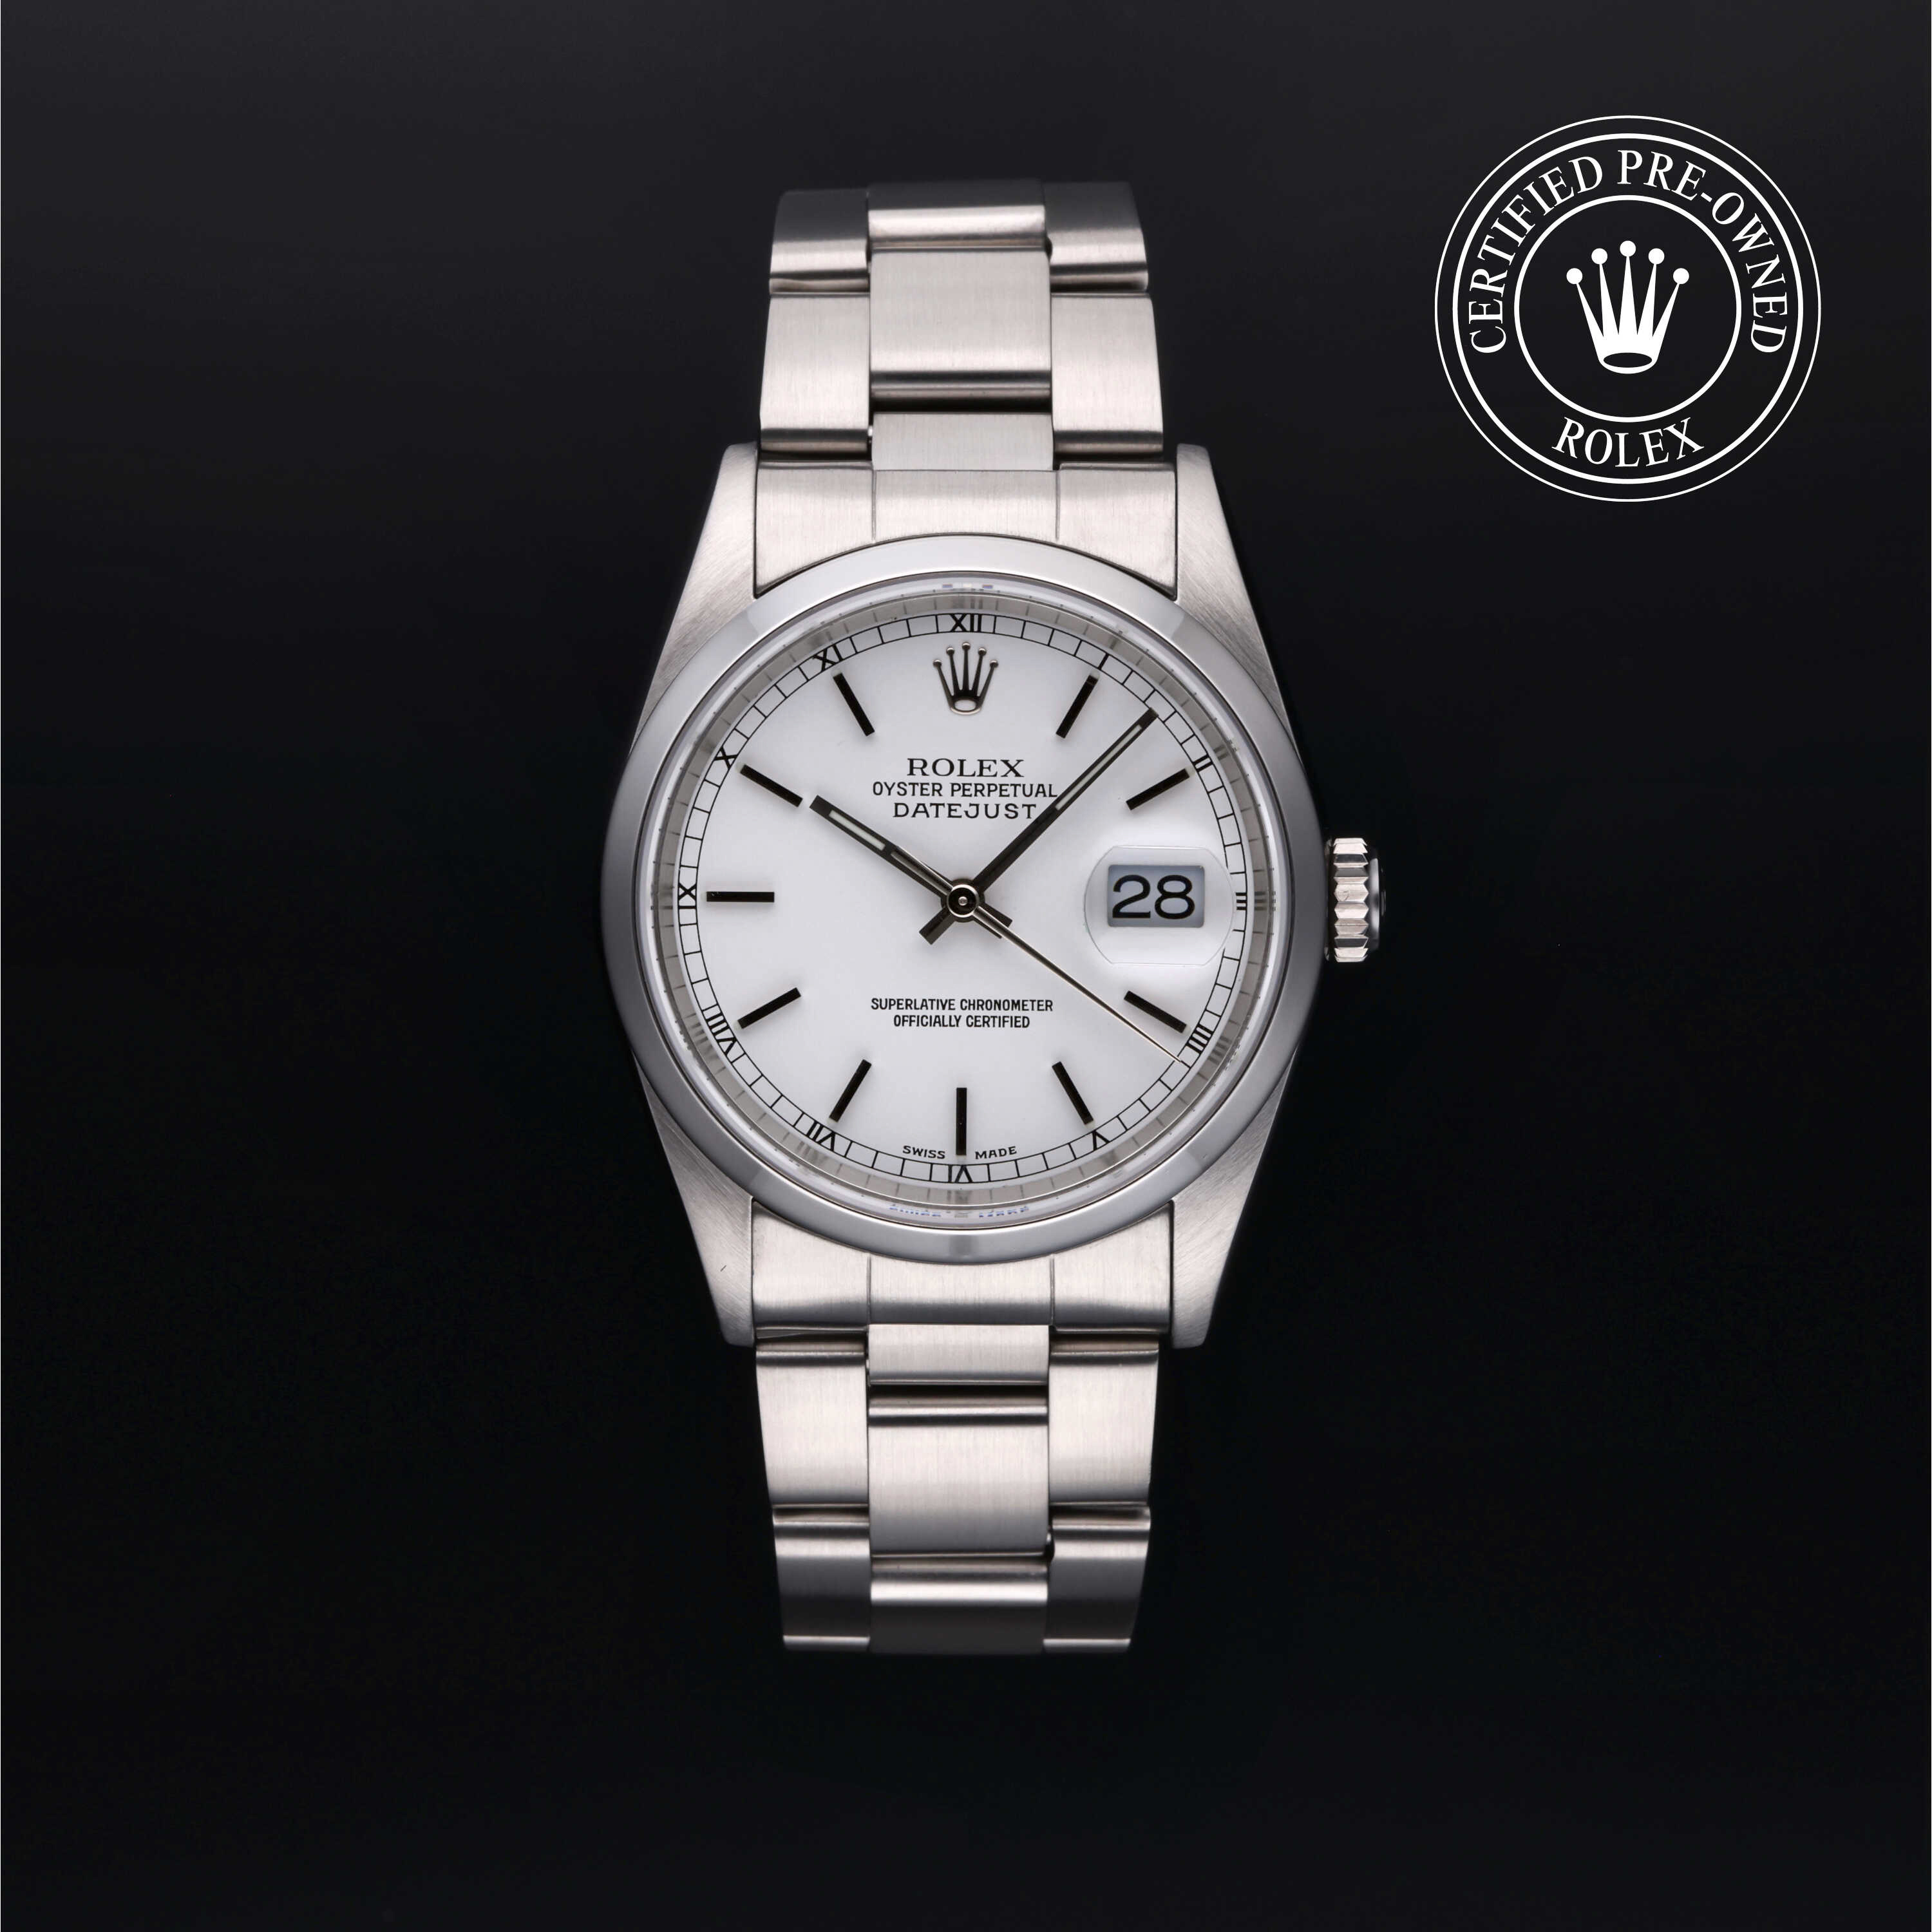 Rolex Datejust in Oystersteel M16200-0032 at Wilson & Son Jewelers